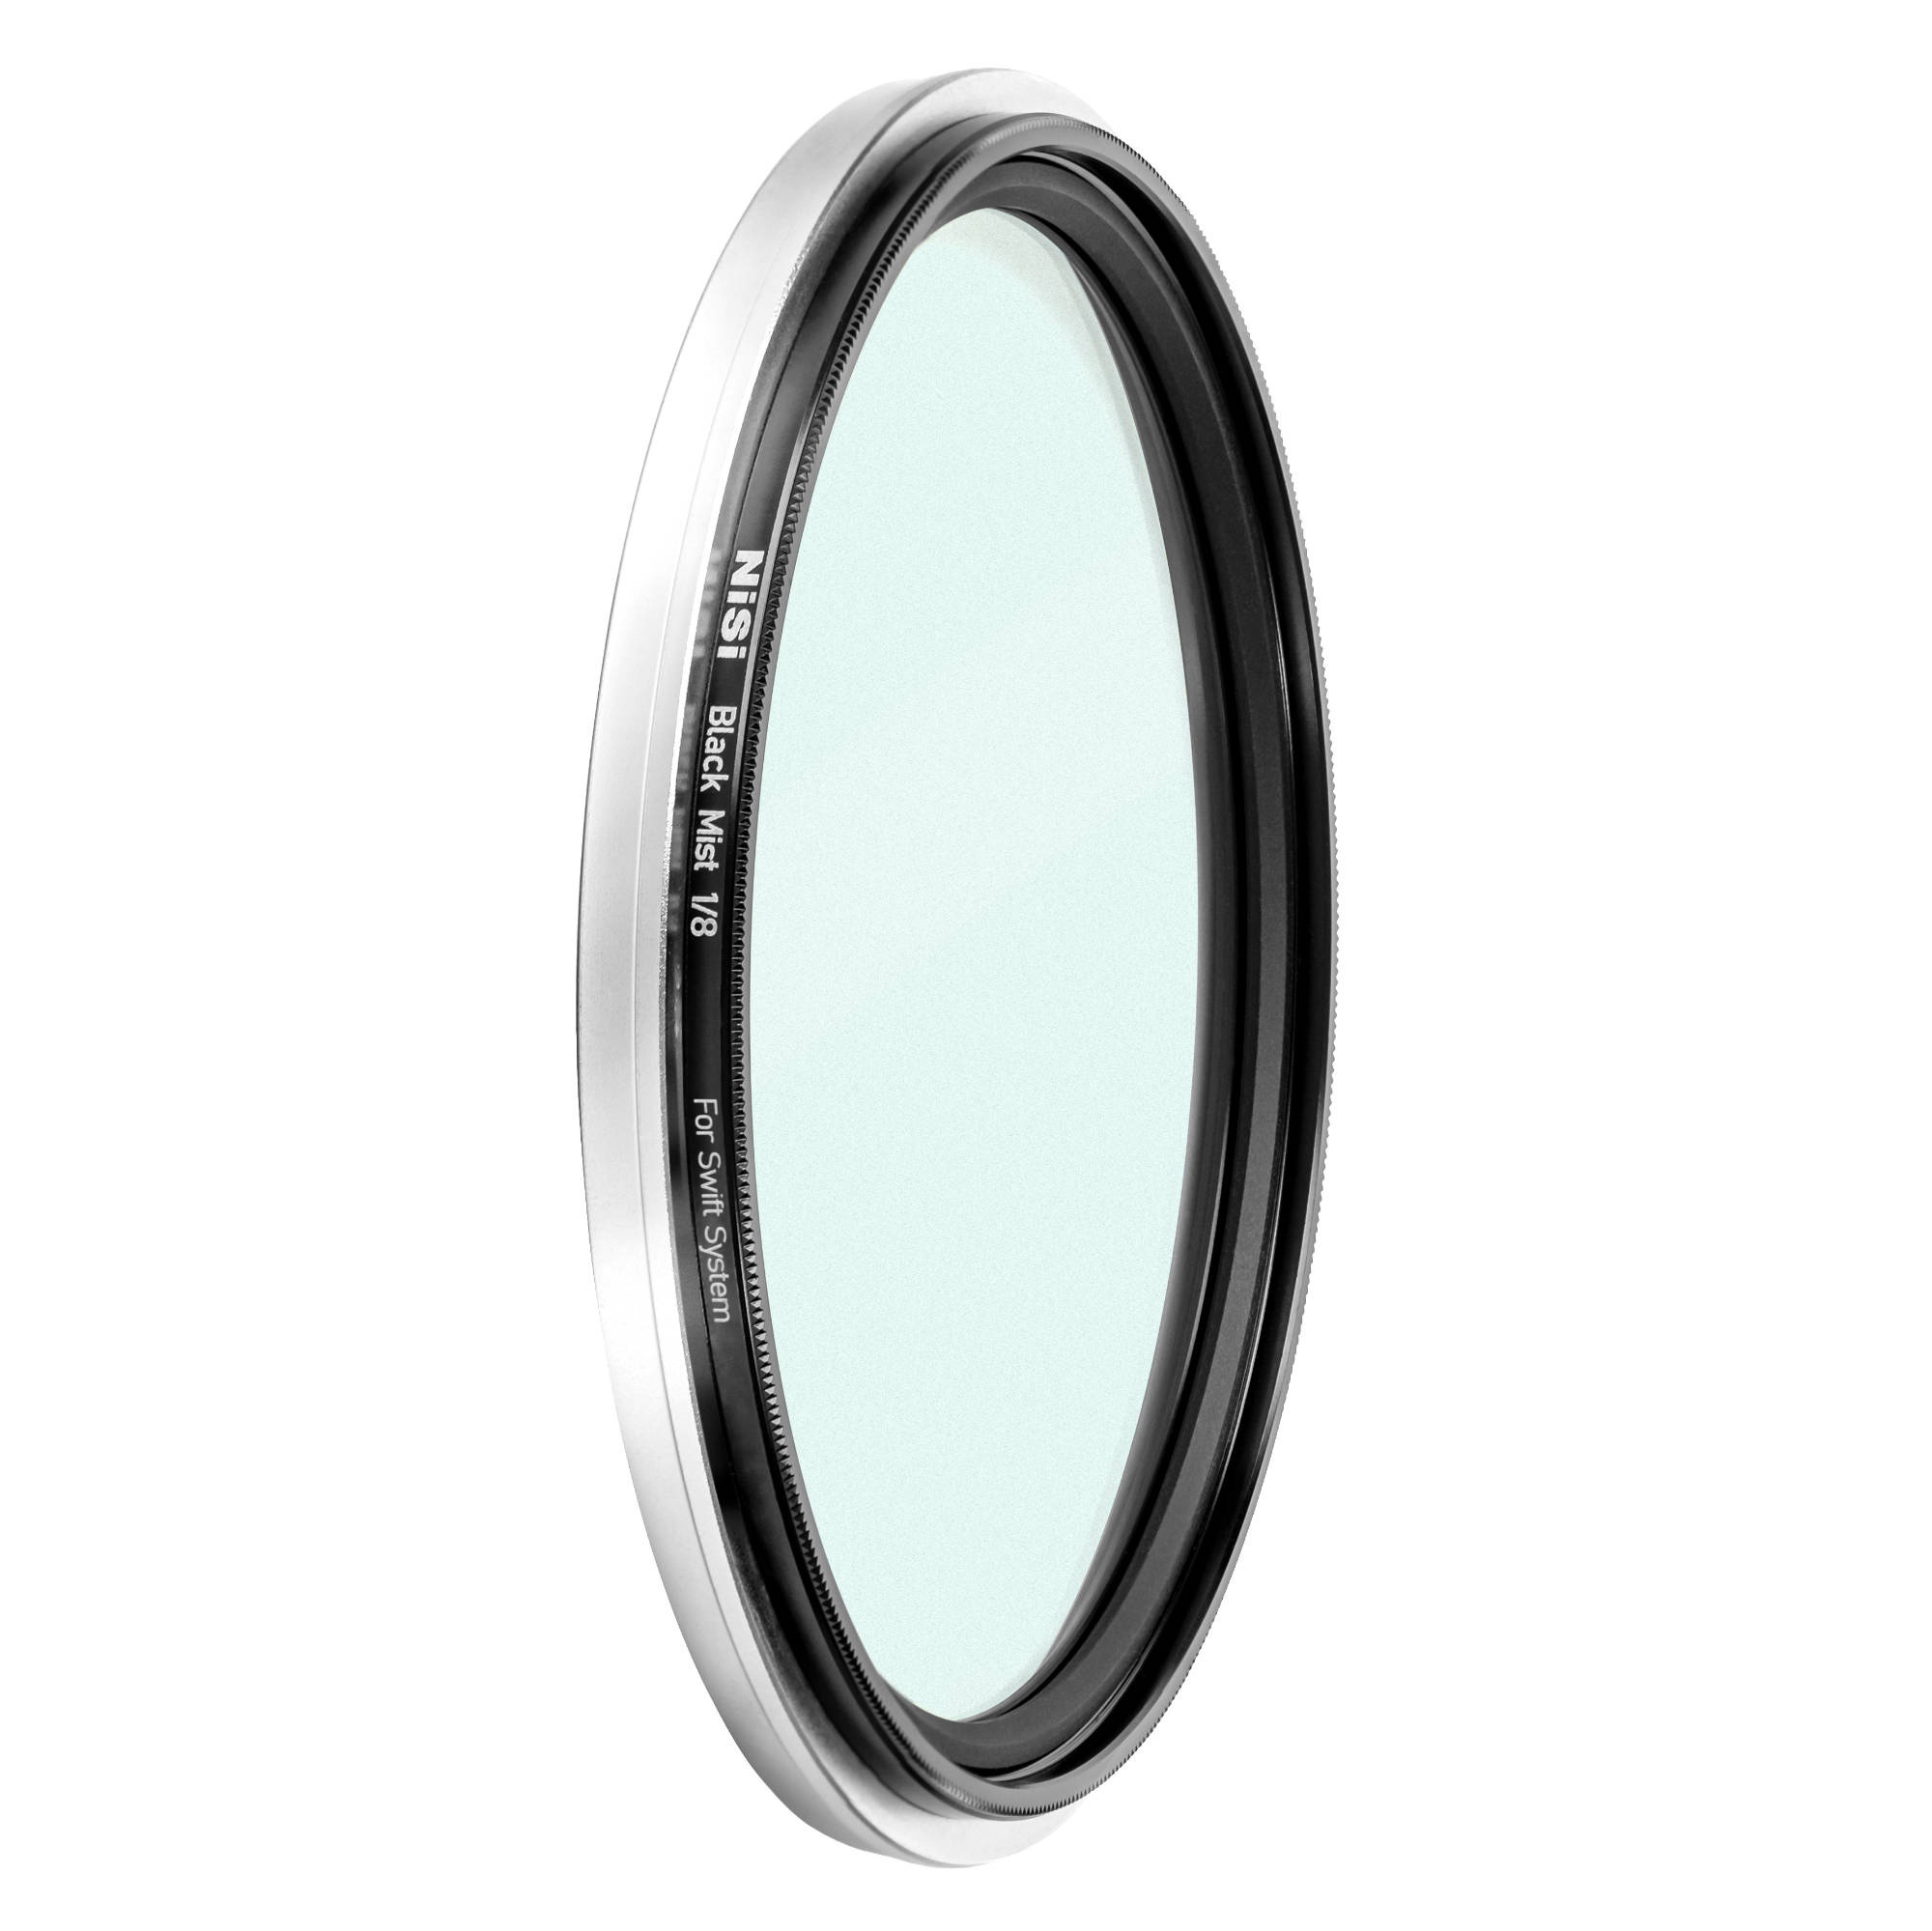 NiSi Black Mist 1/8 Filter for 95mm True Colour VND and Swift System